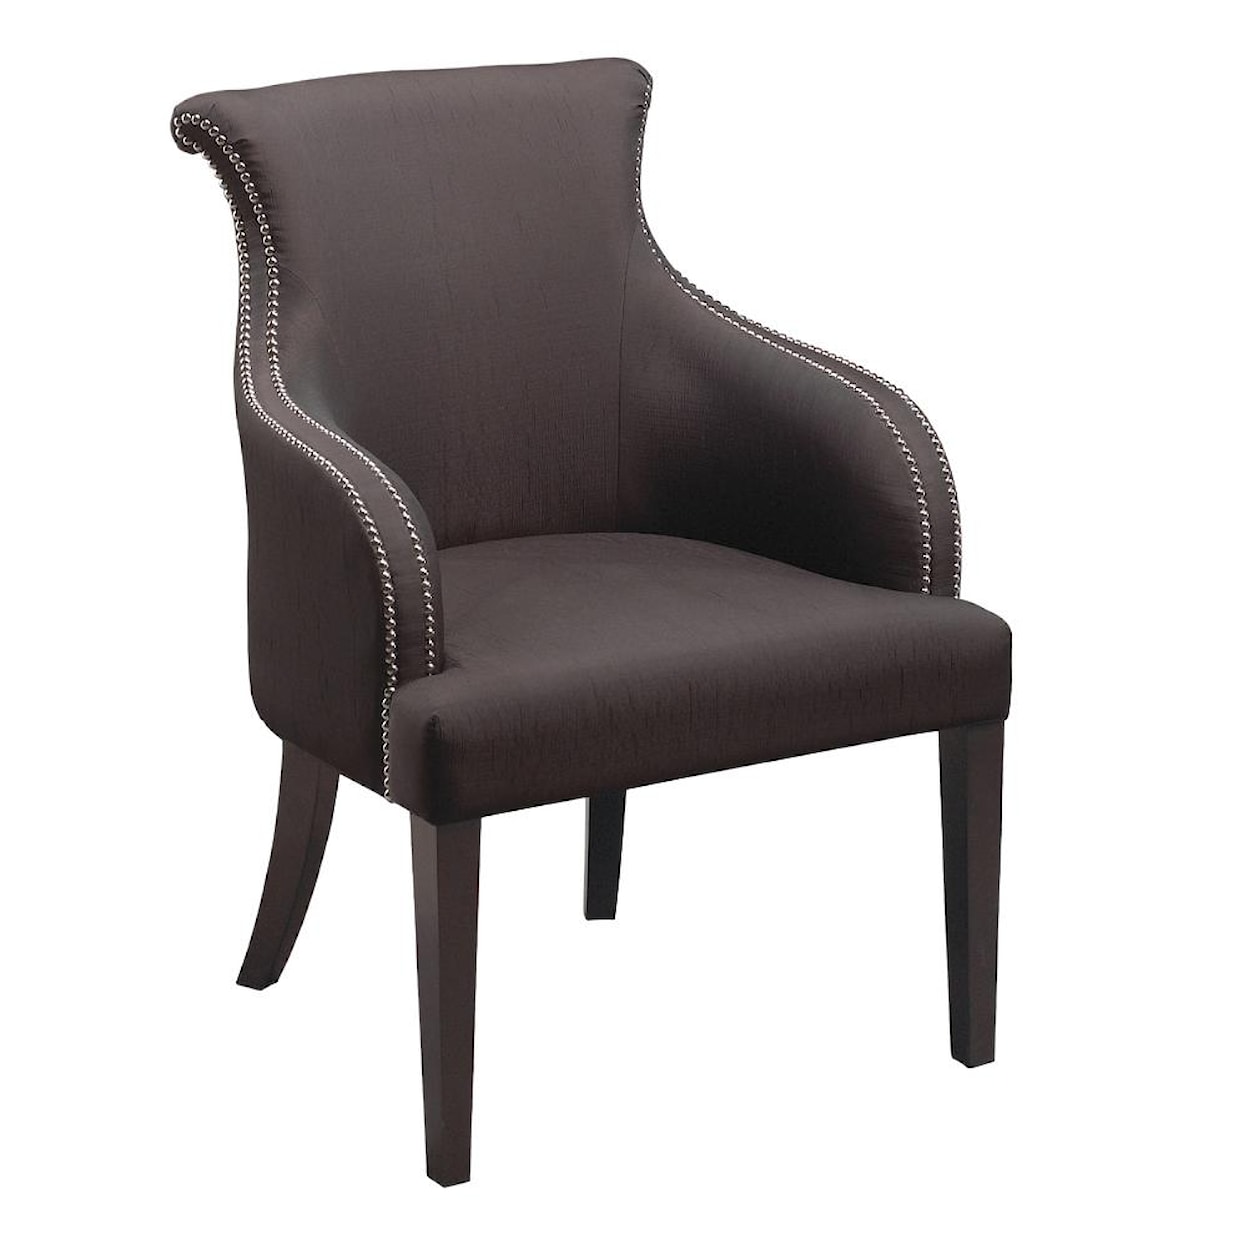 Stein World Accent Chairs Padded Accent Chair